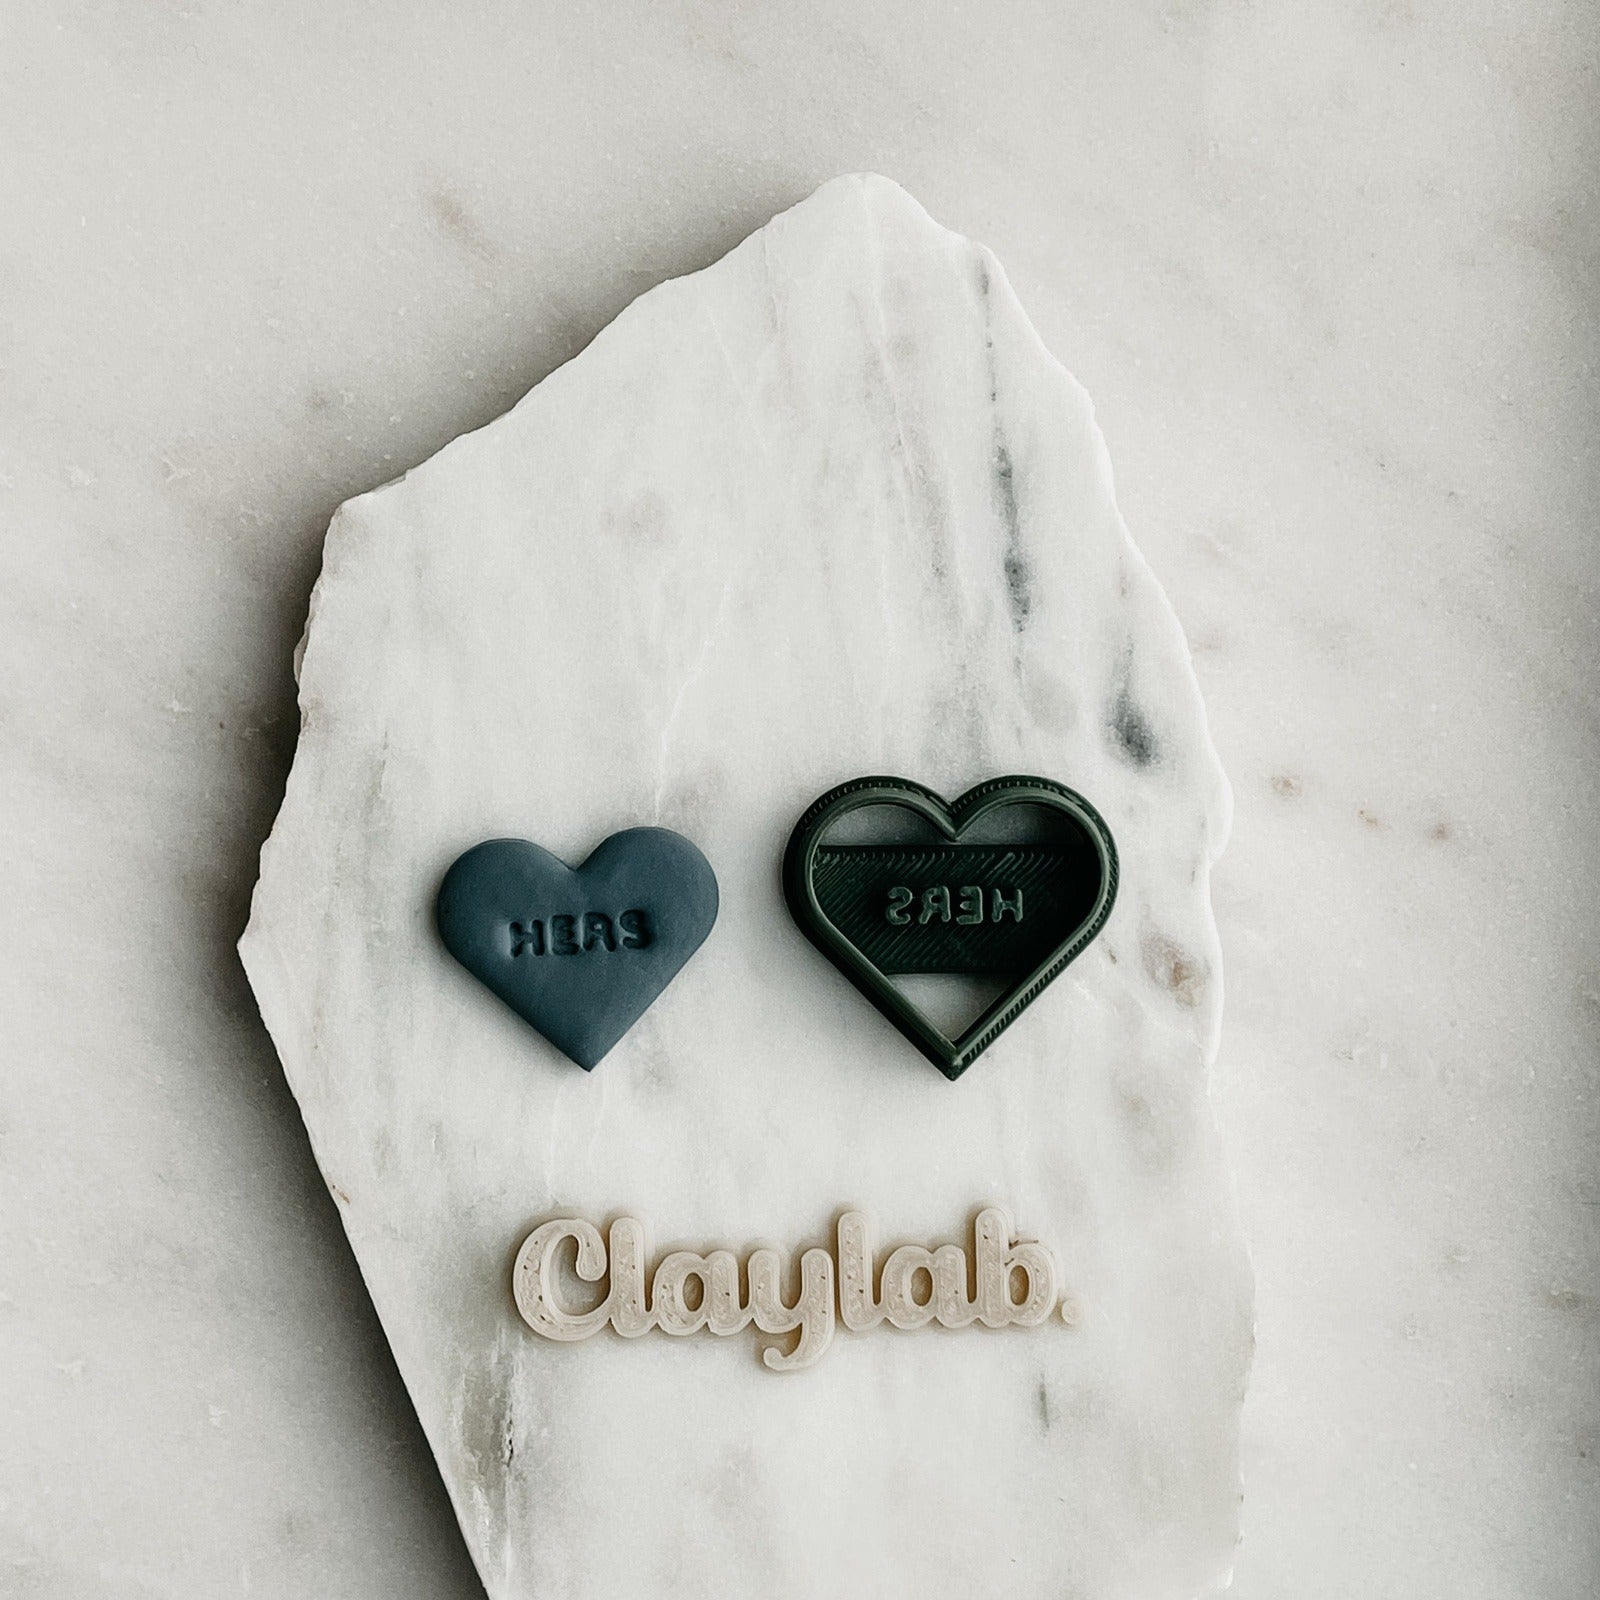 HERS Candy Heart Clay Cutter Claylab